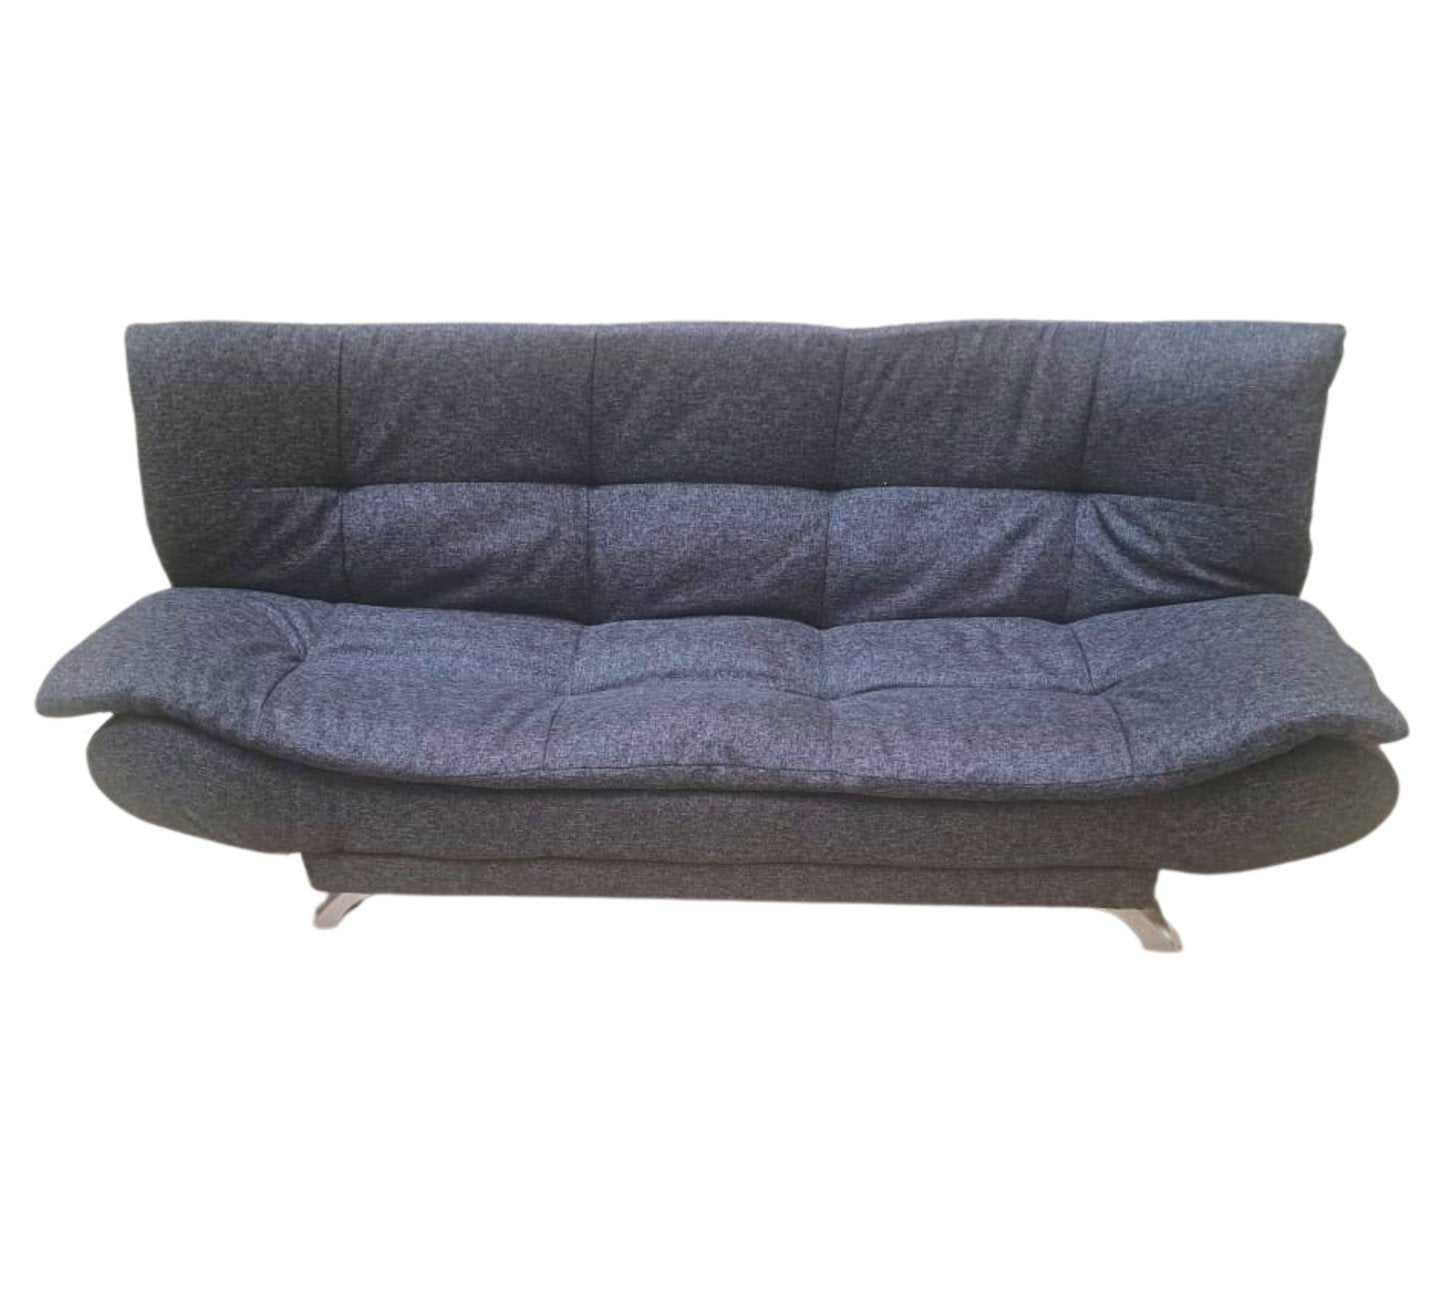 Modern Sleeper Couch - That Couch Place